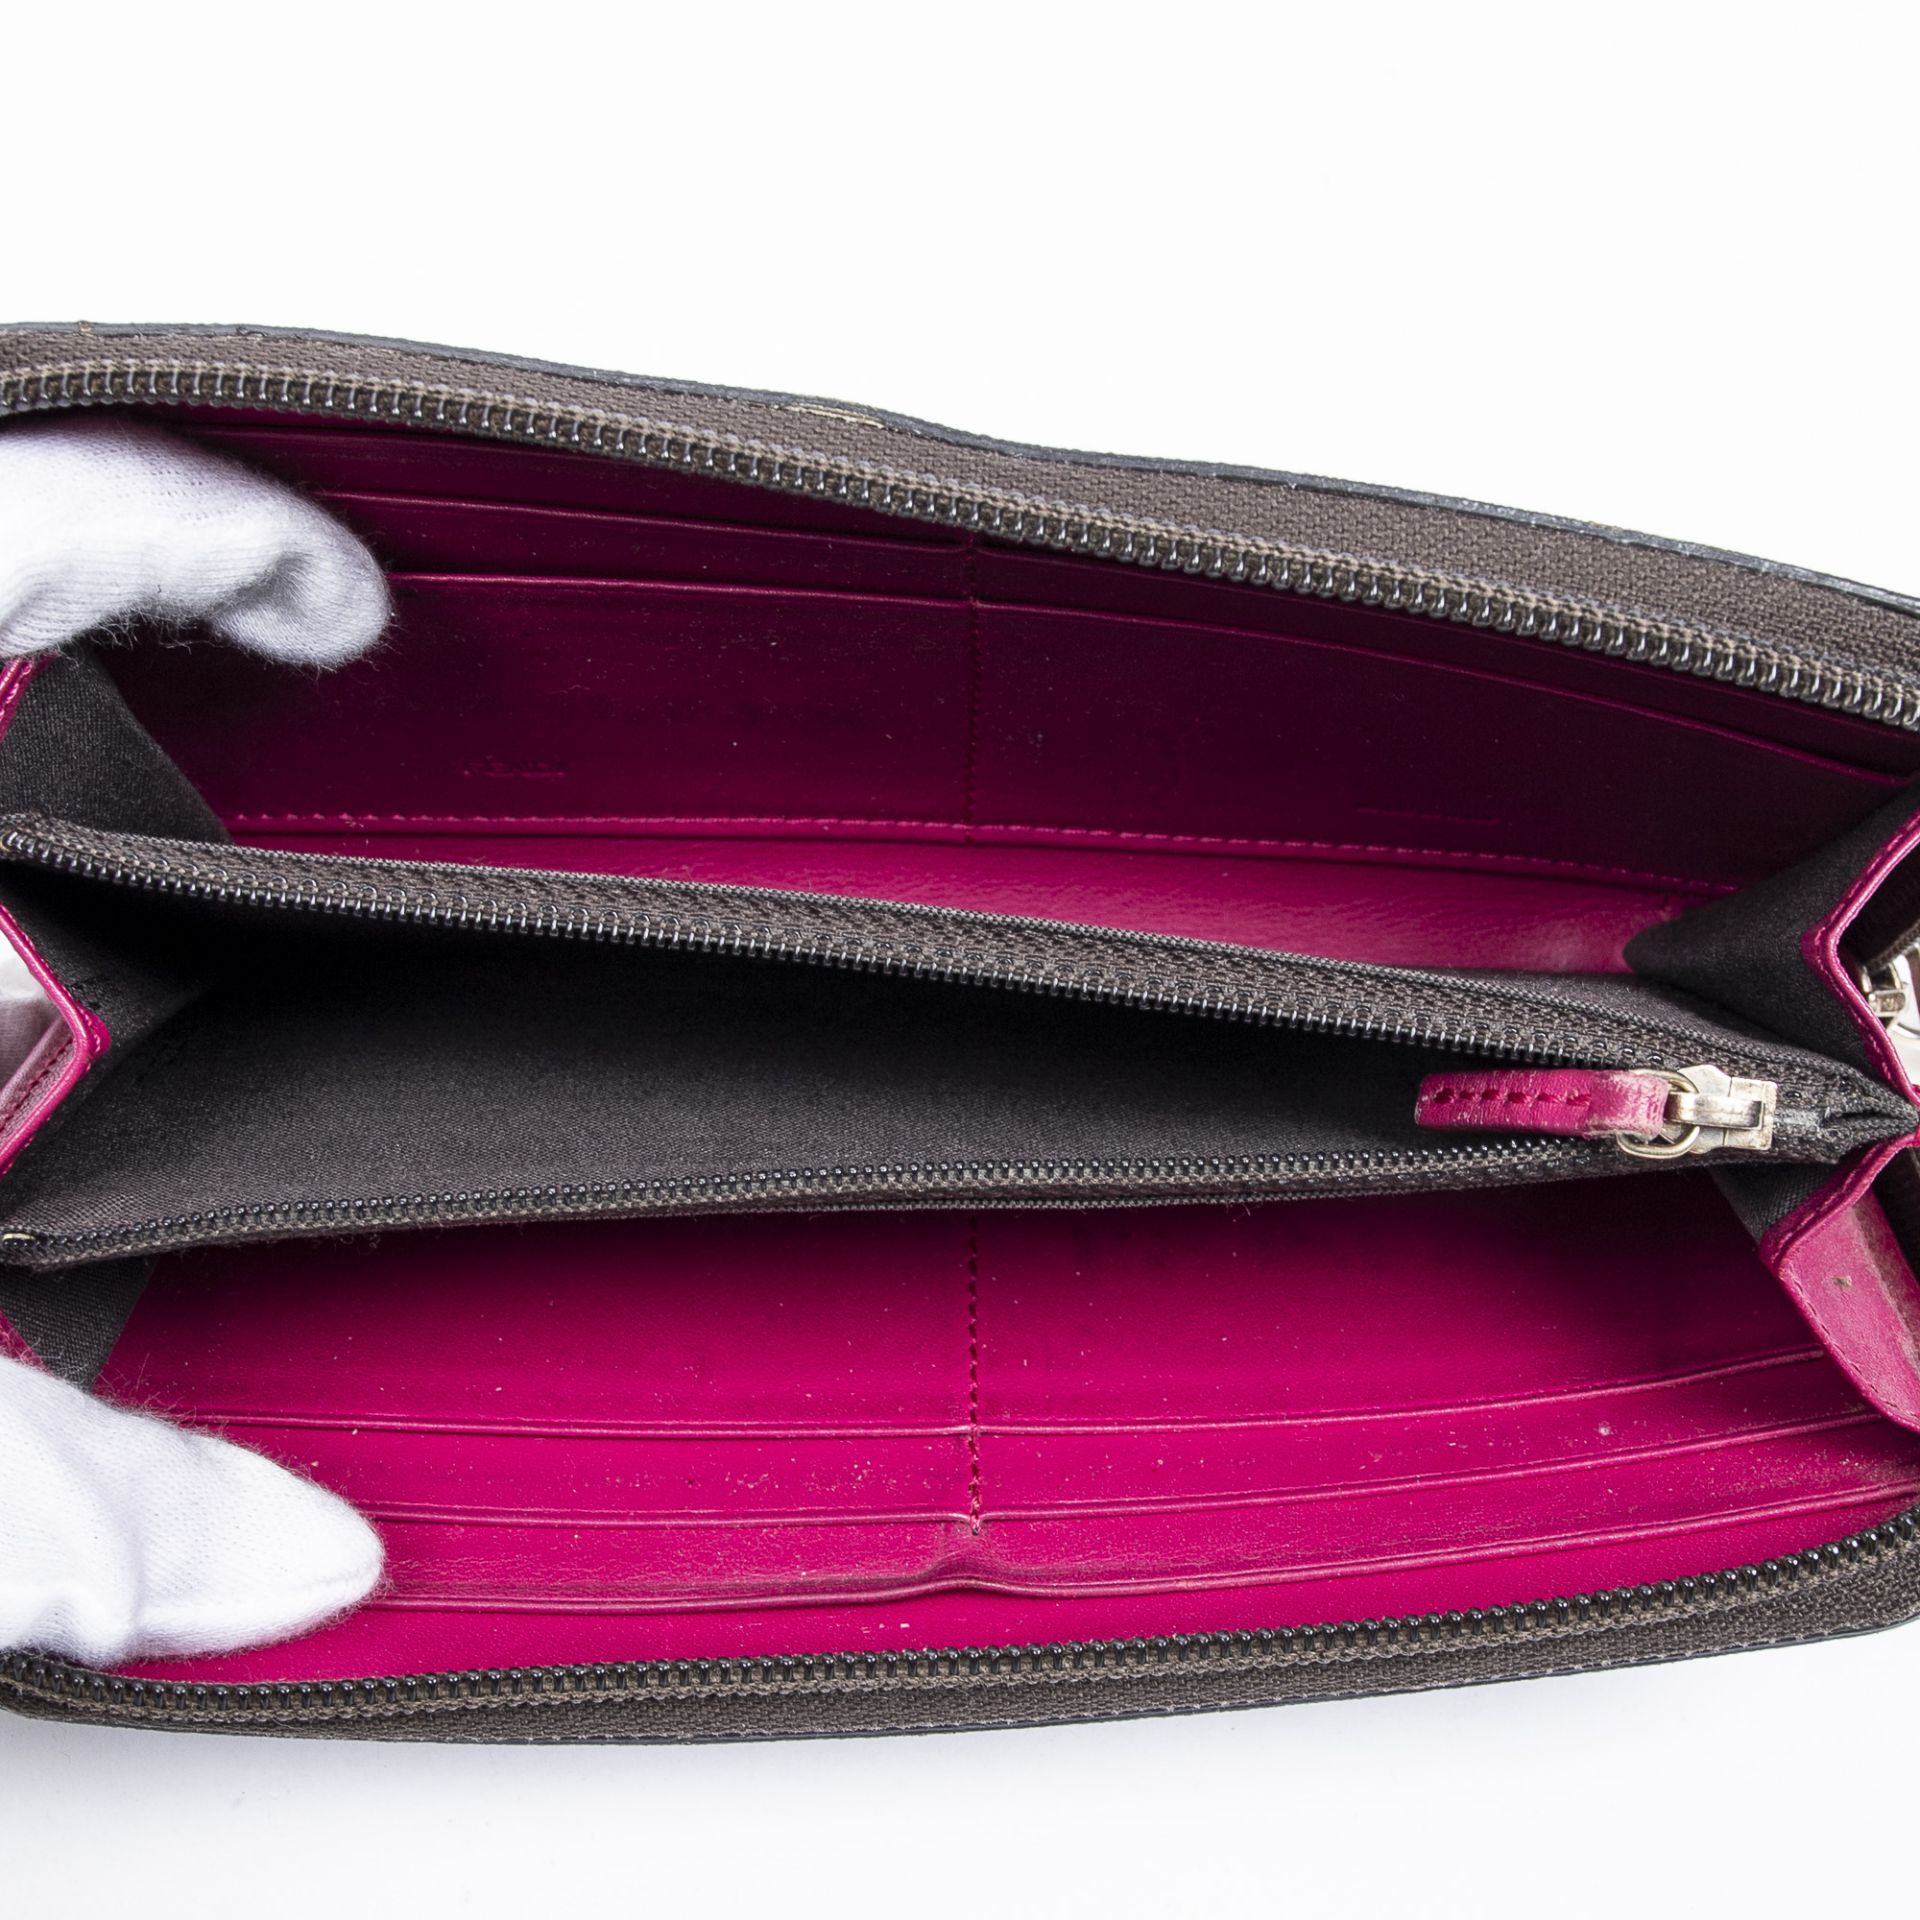 RRP £475.00 Lot To Contain 1 Fendi Coated Canvas Zip Around Wallet In Black/Multicolour - 18,5*10* - Image 3 of 3